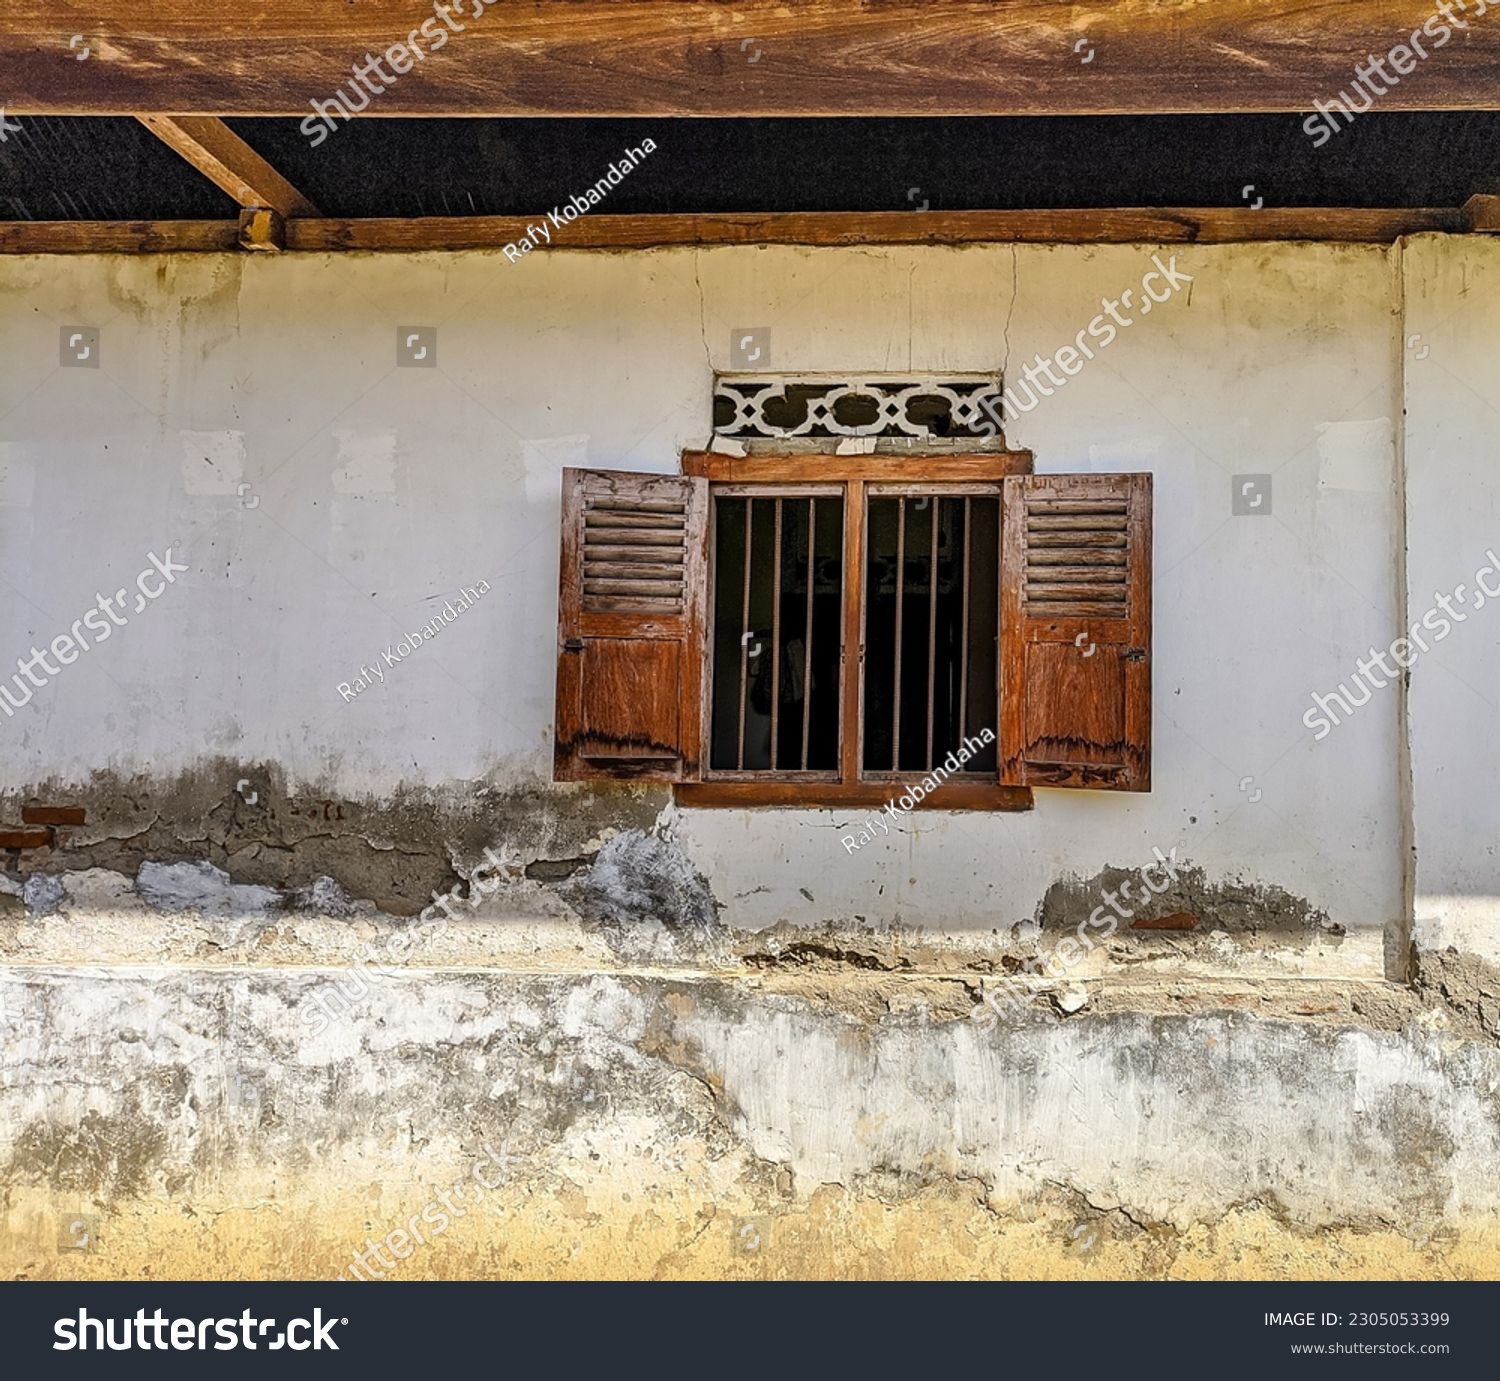 Old wooden window that opens, country house with old cracked concrete #2305053399